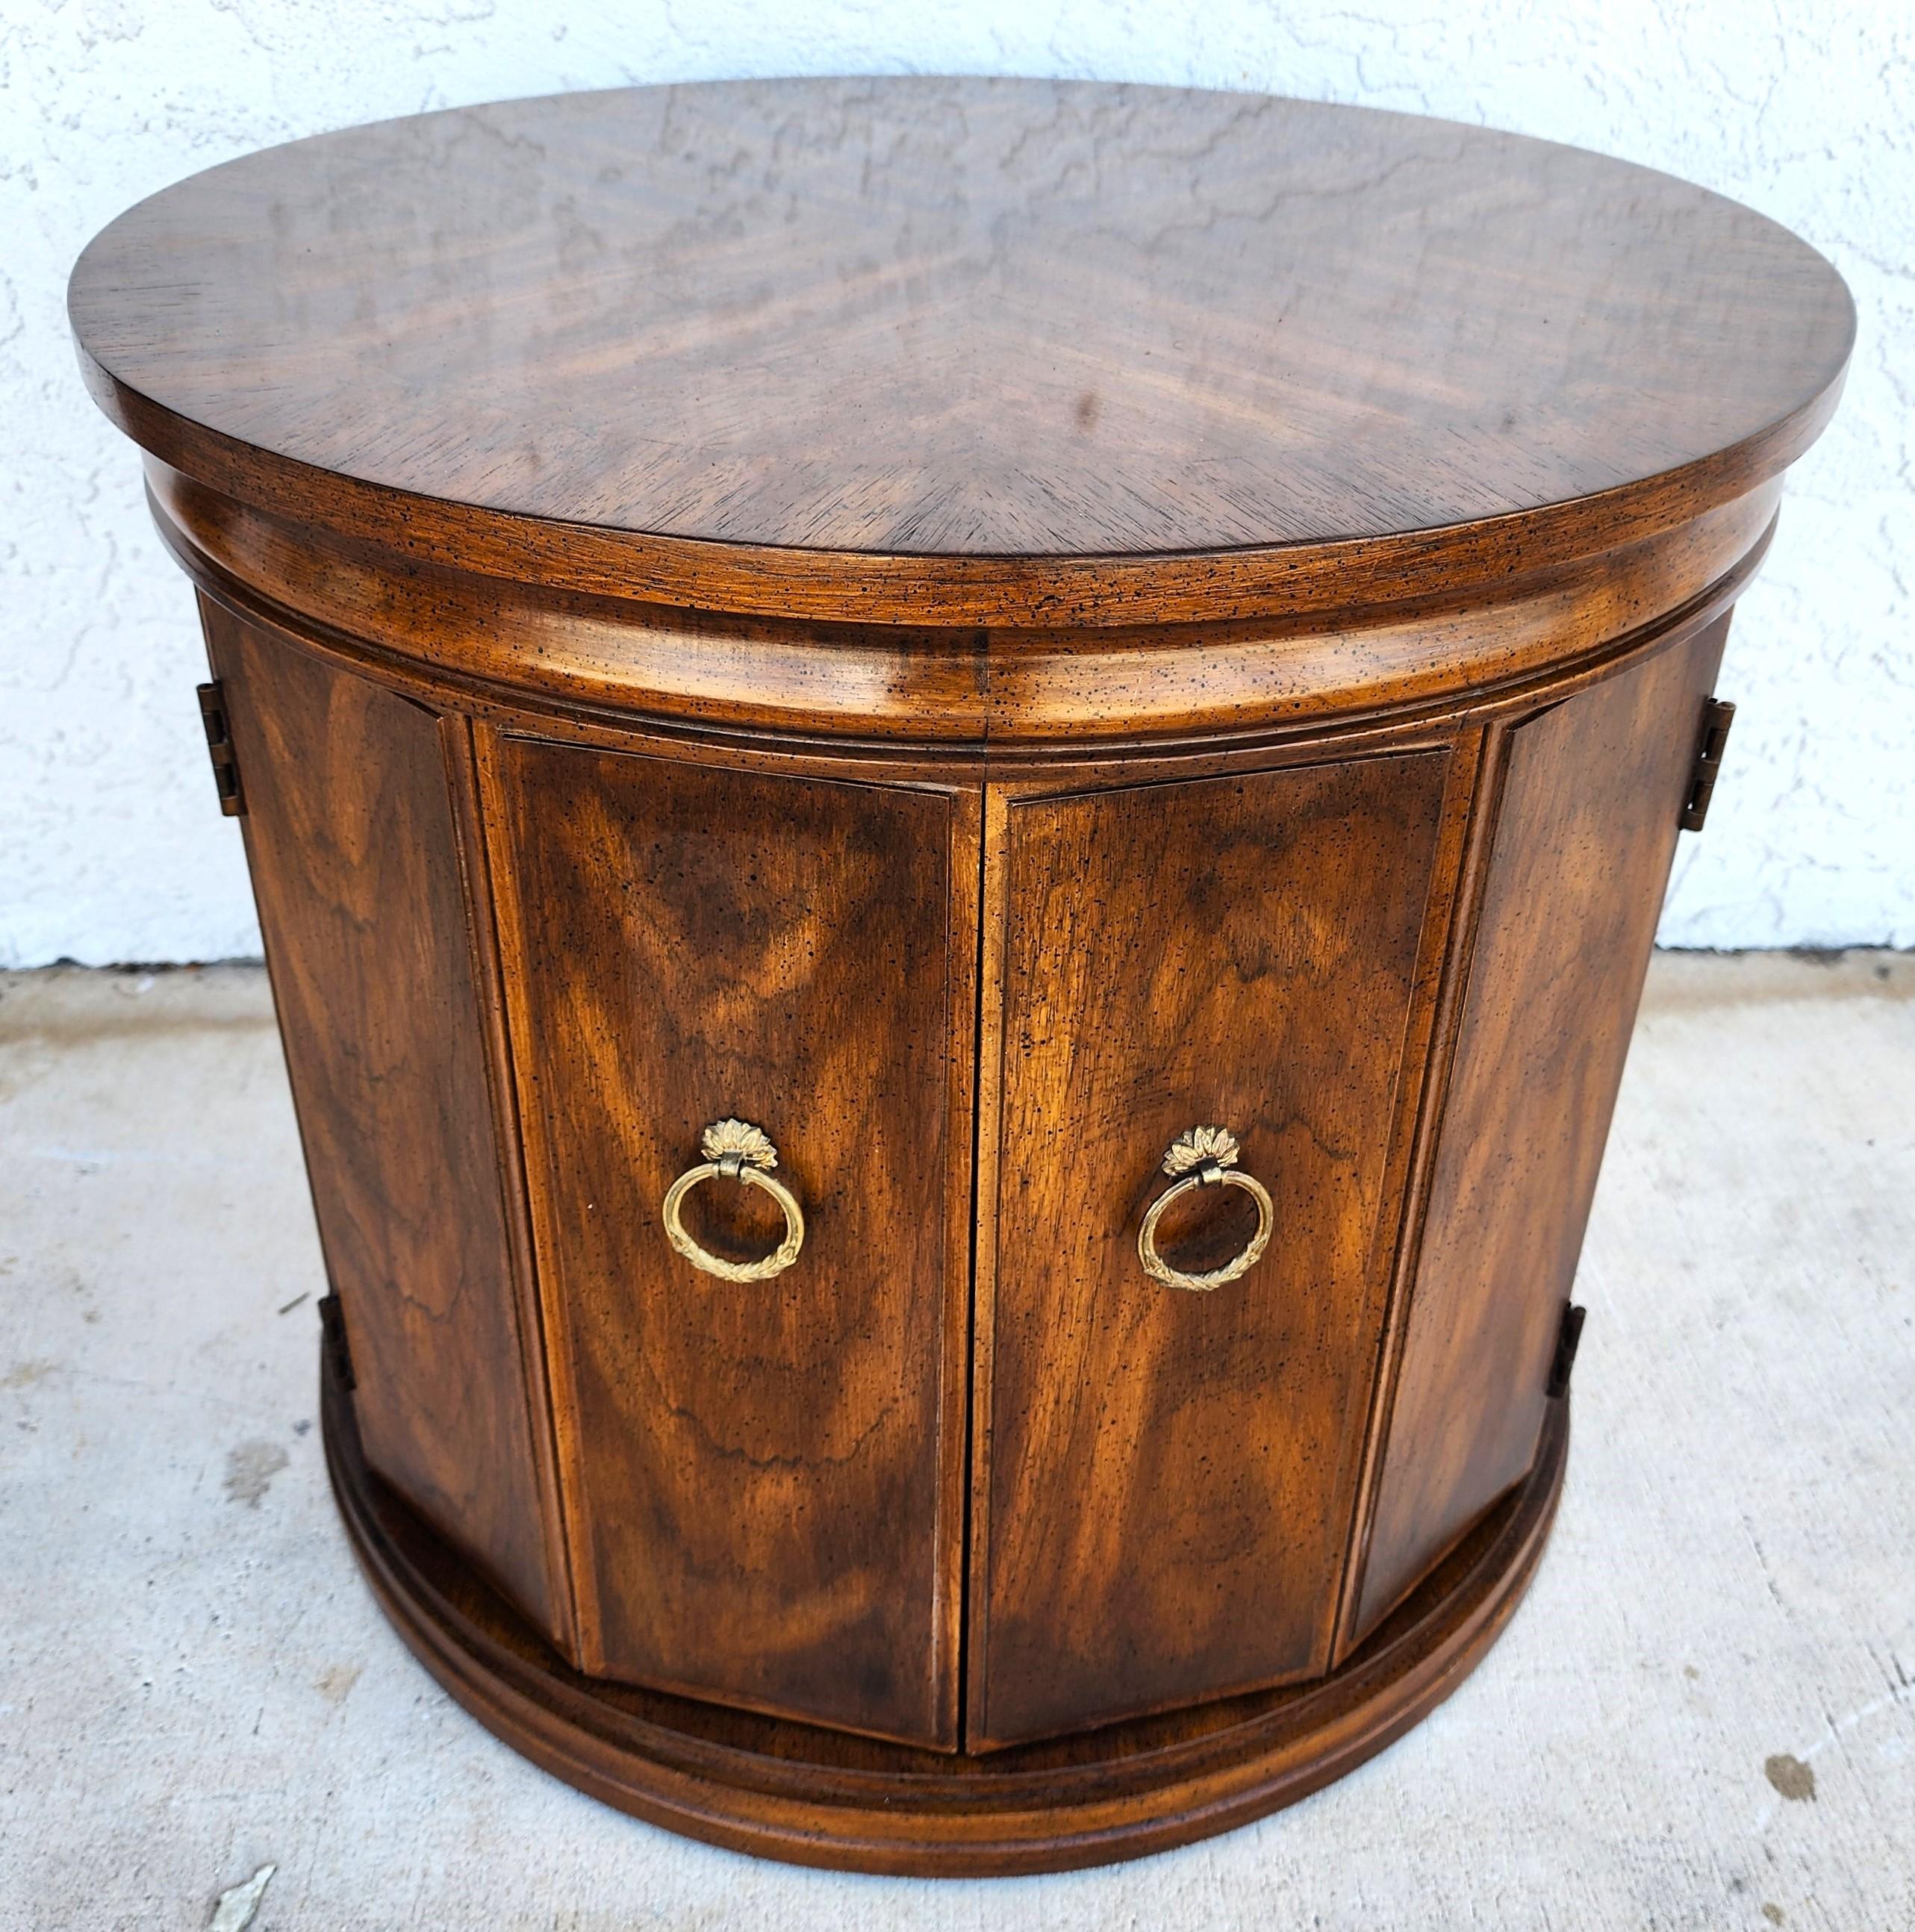 For FULL item description click on CONTINUE READING at the bottom of this page.

Offering One Of Our Recent Palm Beach Estate Fine Furniture Acquisitions Of A
Vintage Mid Century Modern Drum Side End Center Table with Storage by Weiman

Approximate